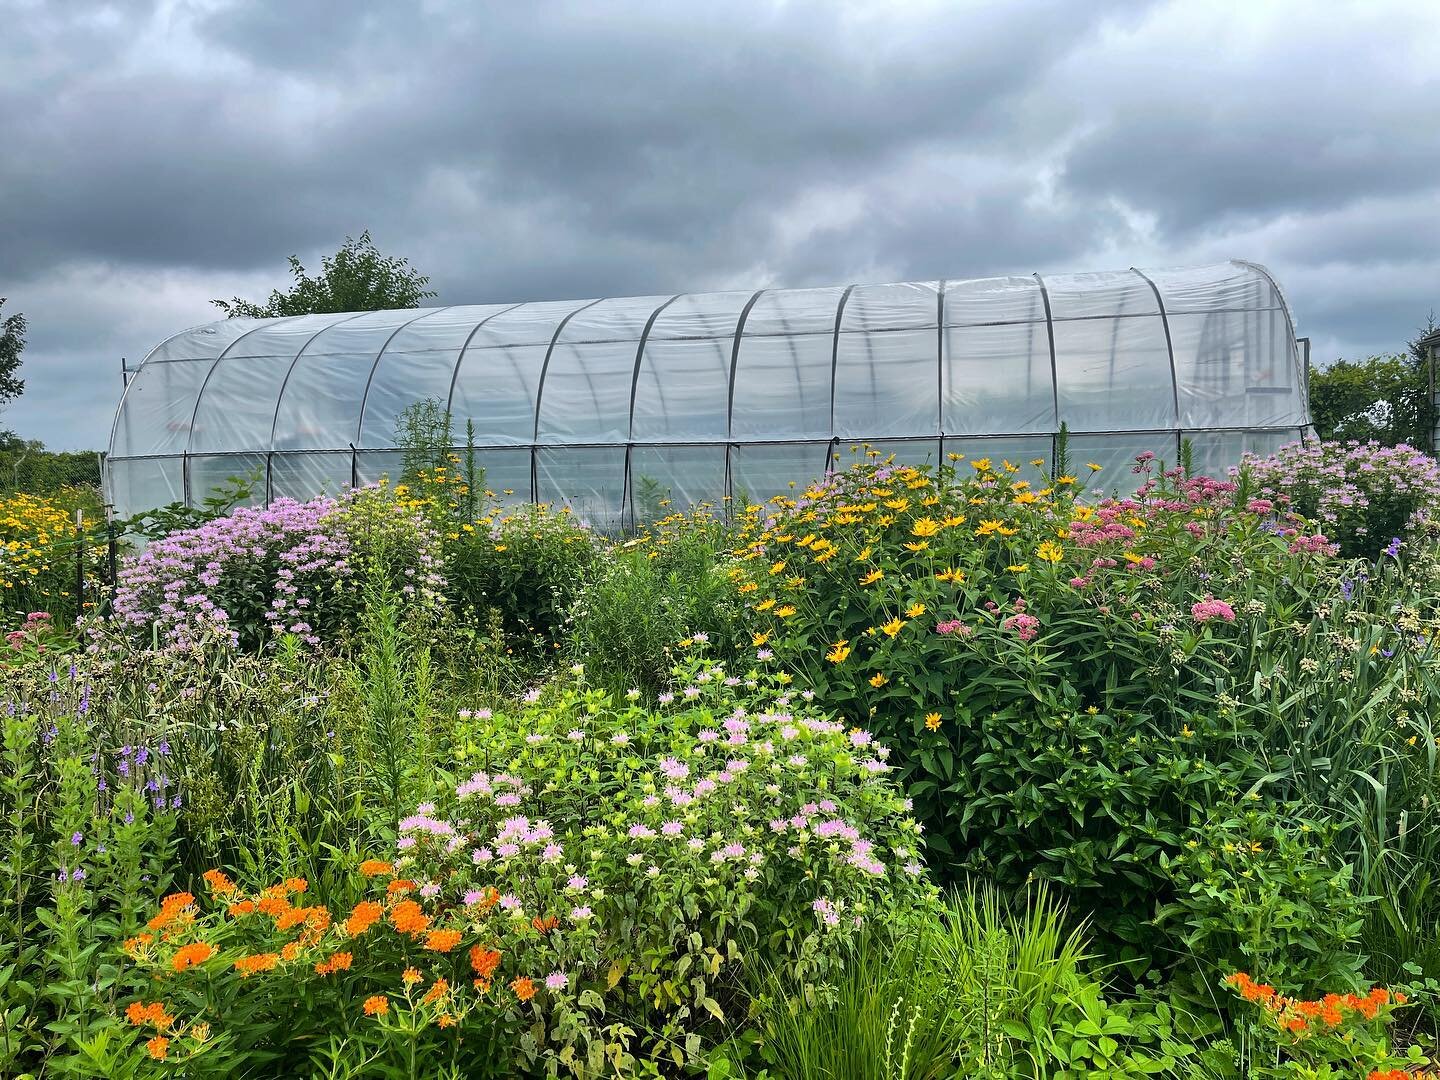 Peak bloom time 💕🧡💛💚💜!!!
Our pollinator garden @oaklandu is loving all this rain. We saw lots of bees buzzing around this morning even with the overcast skies 🐝

#plantsforpollinators #supportbiodiversity #savethebees #pollinatorgarden #gardeni